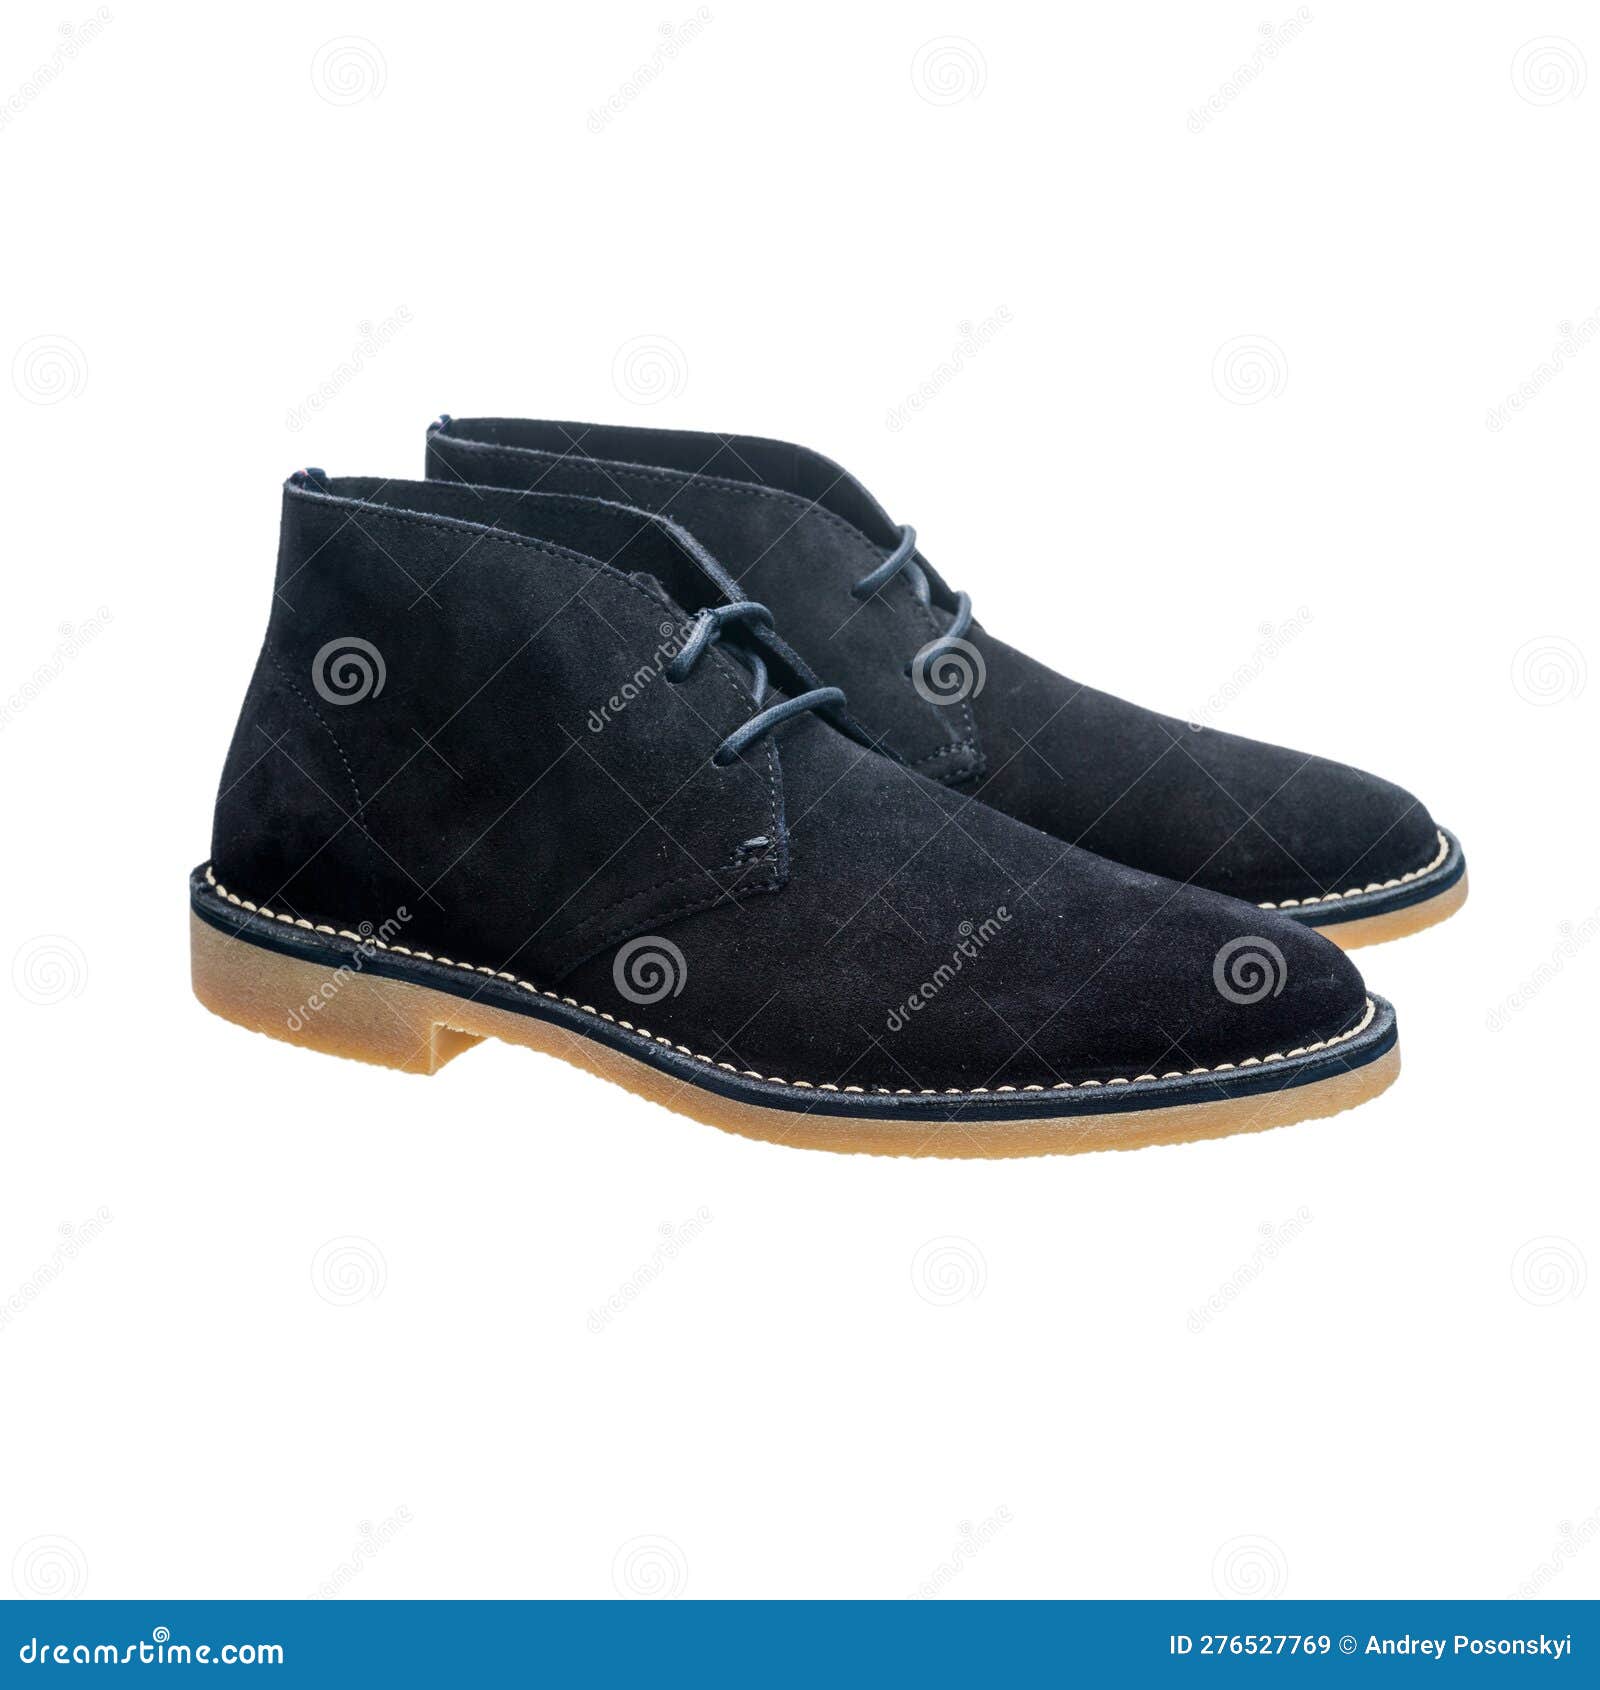 Suede Leather Boots with Laces, Demi-season Shoes Stock Image - Image ...